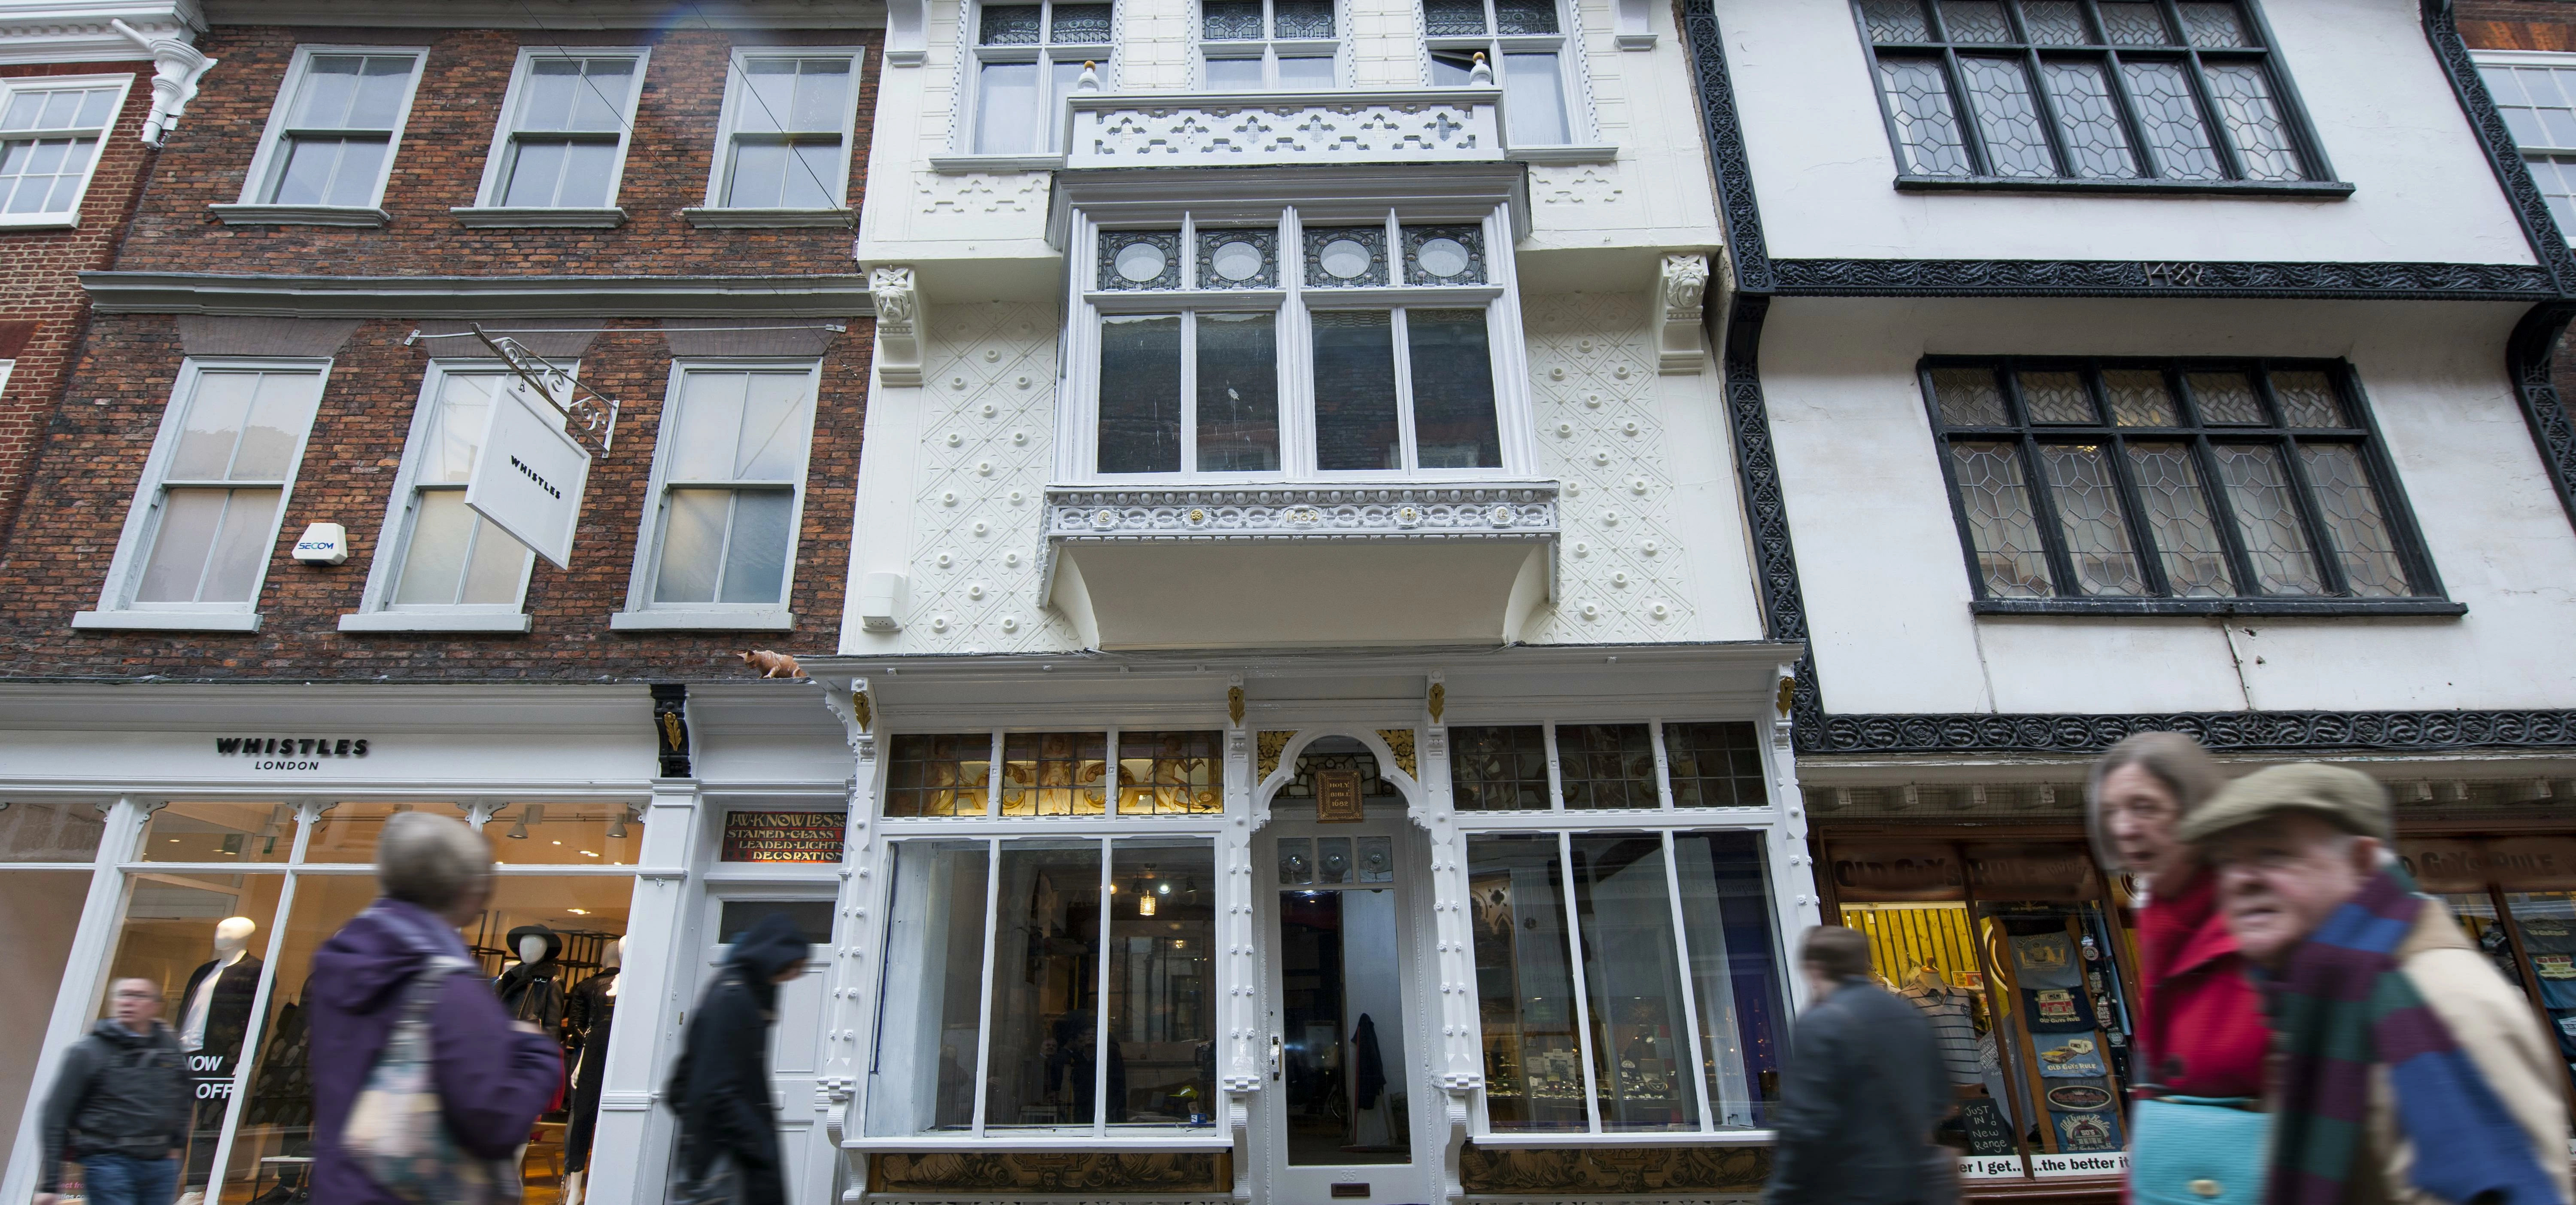 35 Stonegate in York - bought by a wealthy West Yorkshire businessman